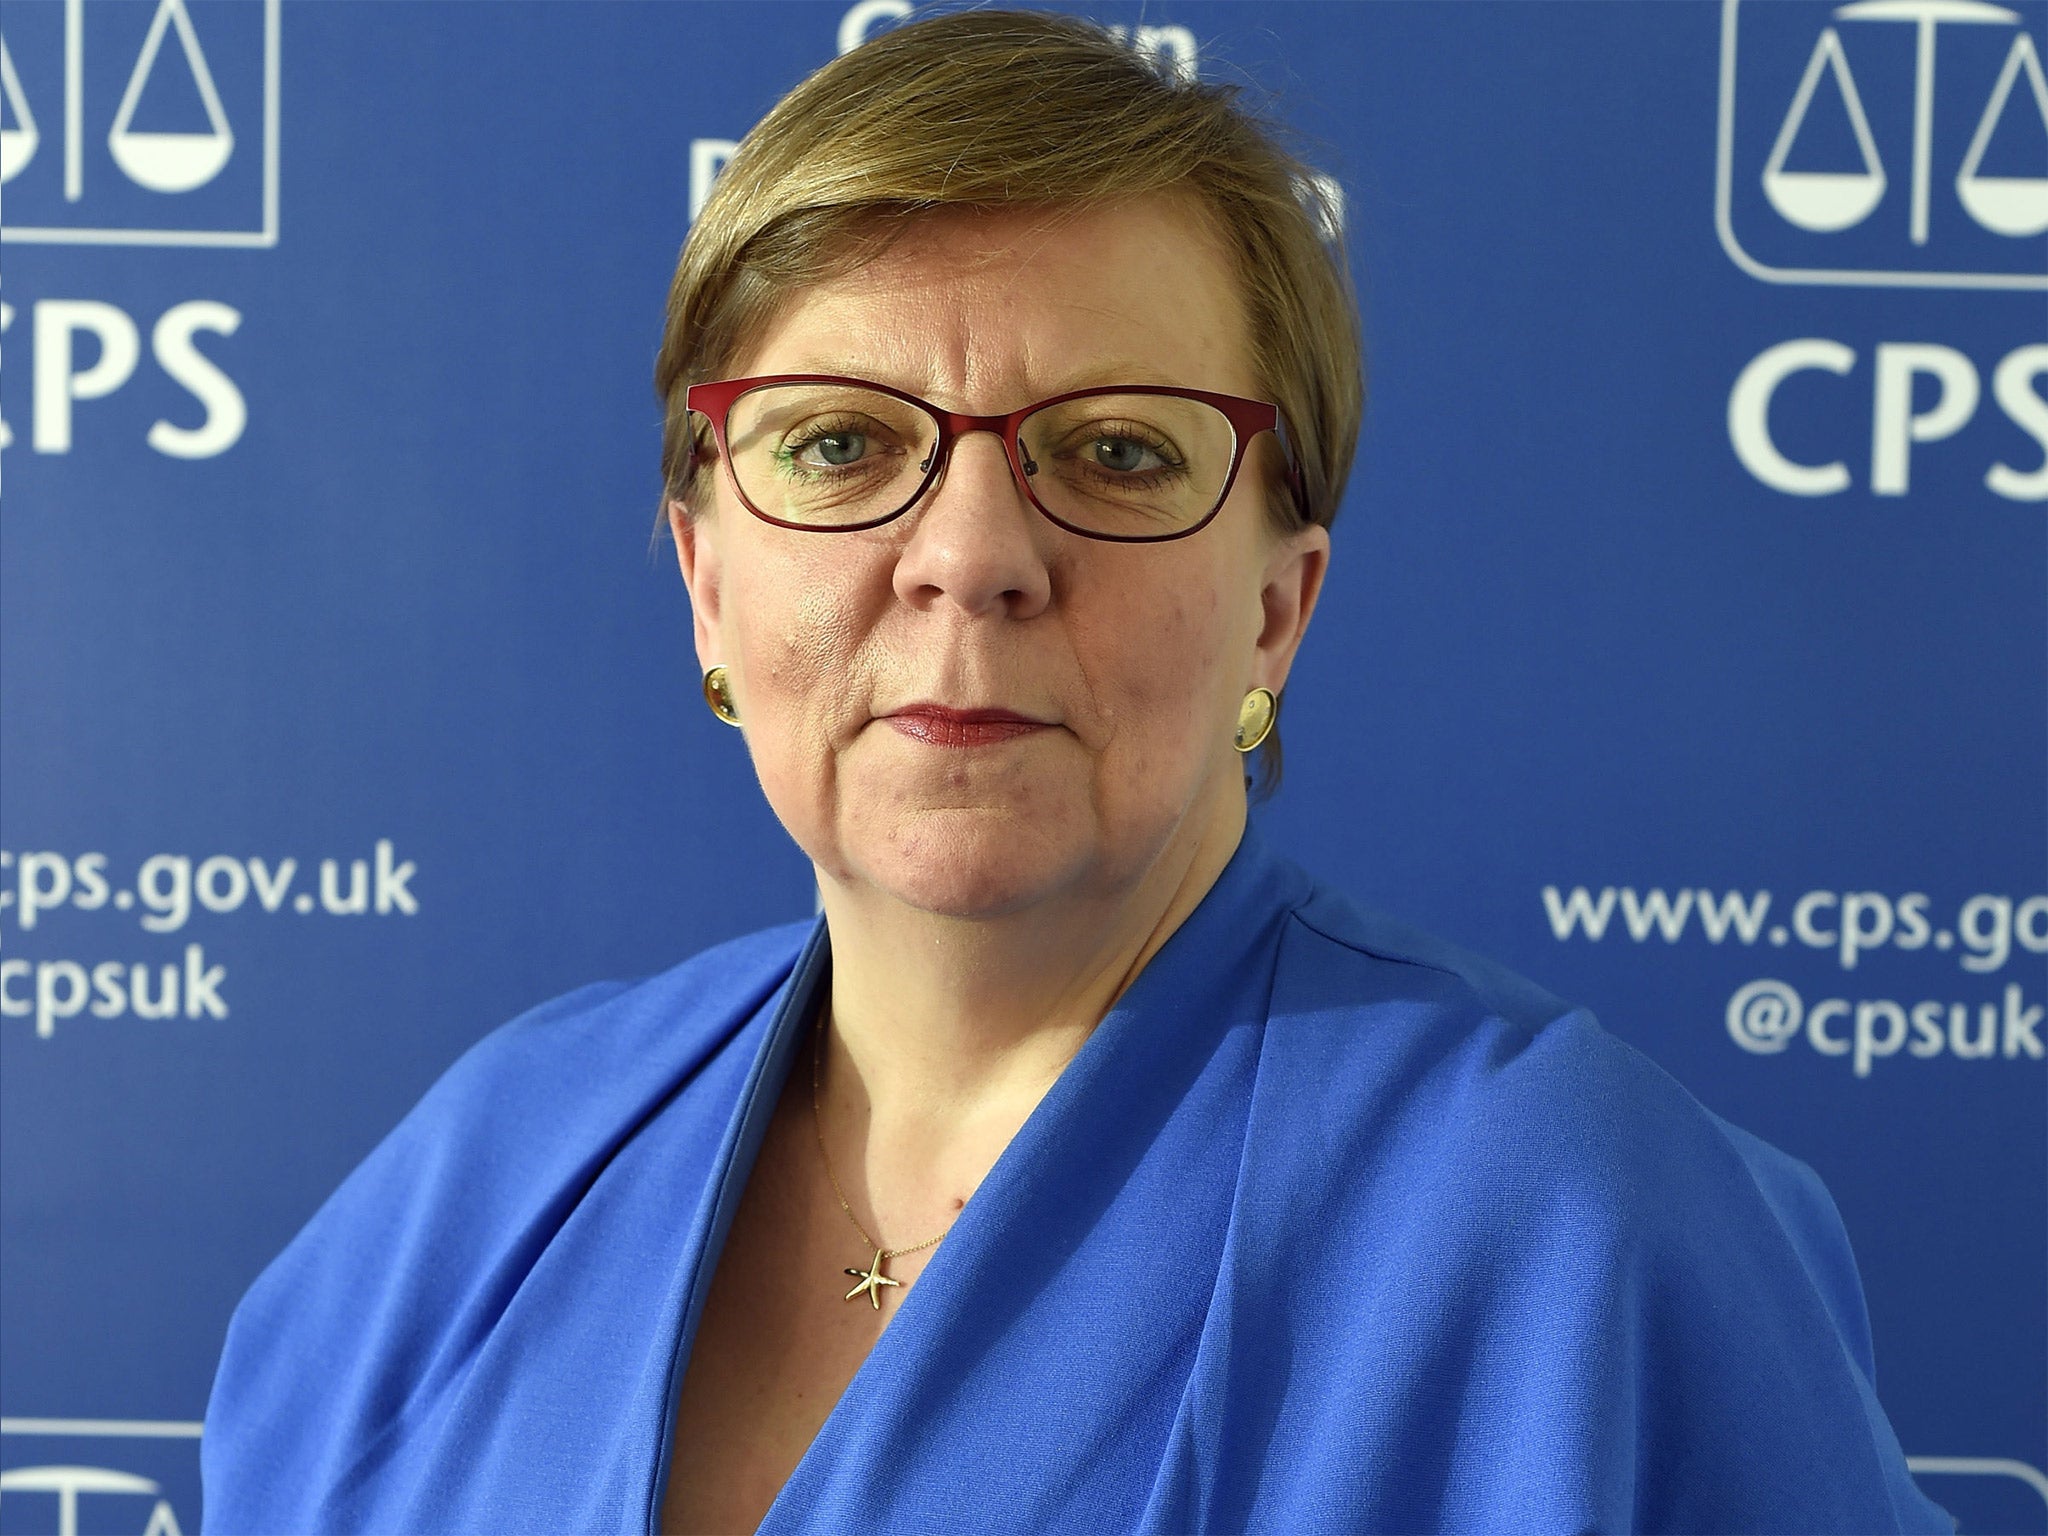 Alison Saunders, the DPP, was criticised over the handling of the Lord Janner case